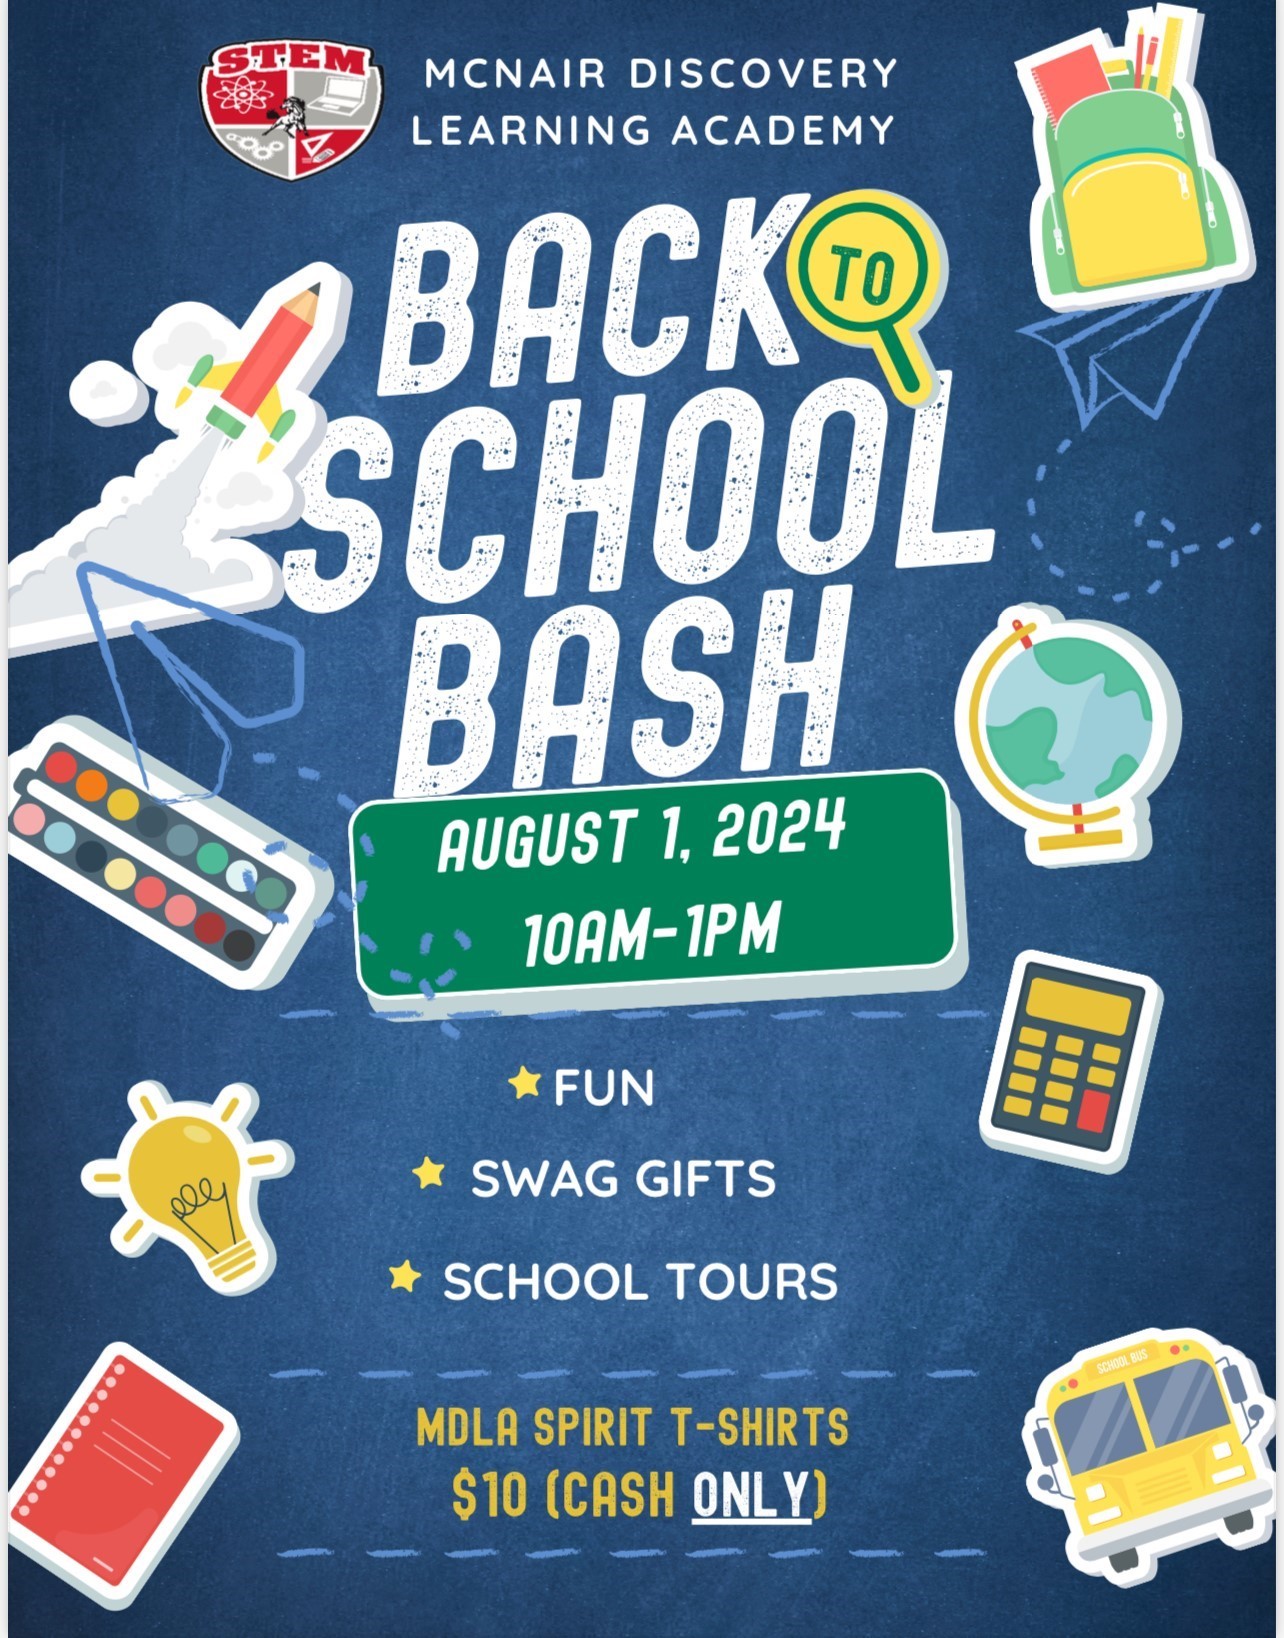 August 1, 2024 10am-1pm back to school bash